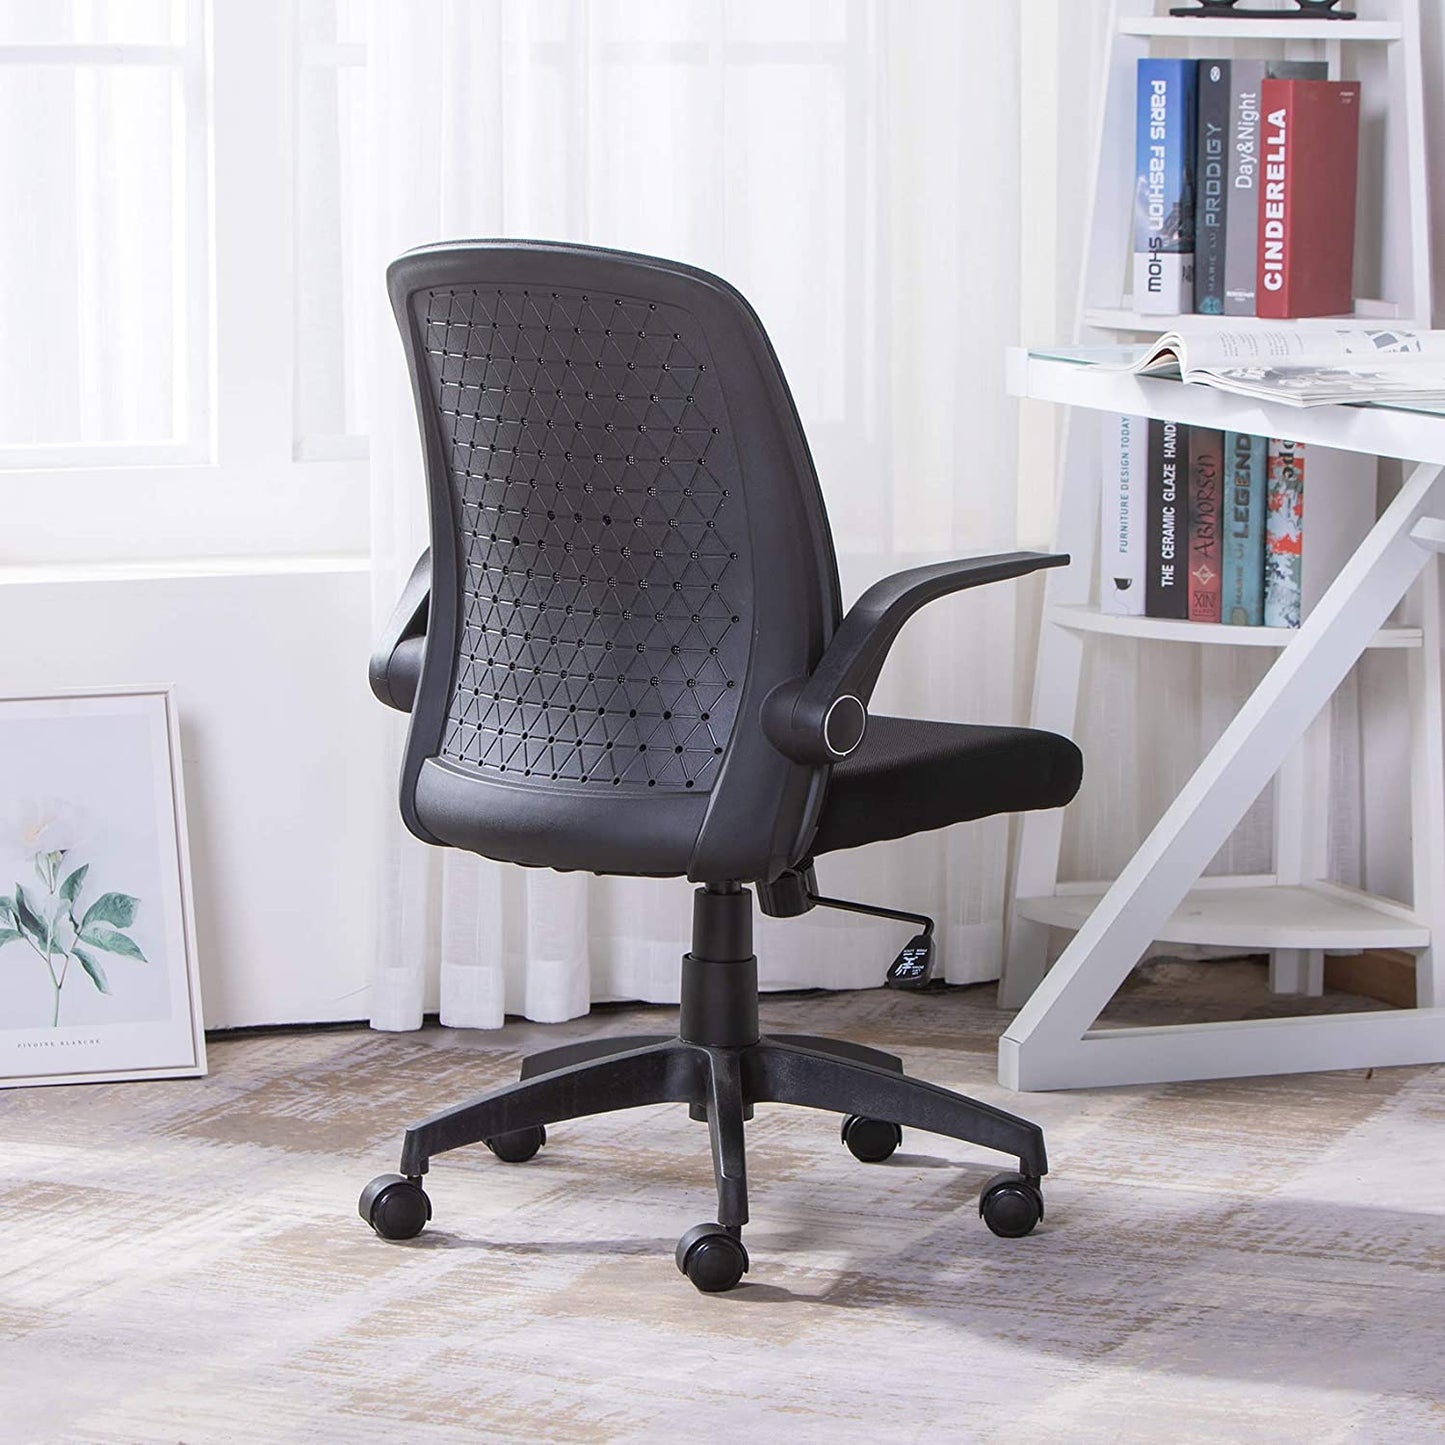 UNICOO - Office Chair Ergonomic Mid Back Swivel Chair, Mesh Computer Chair, Office Task Desk Chair, Home Comfort Chairs with Flip-up Armrests (W-179-1 Black)